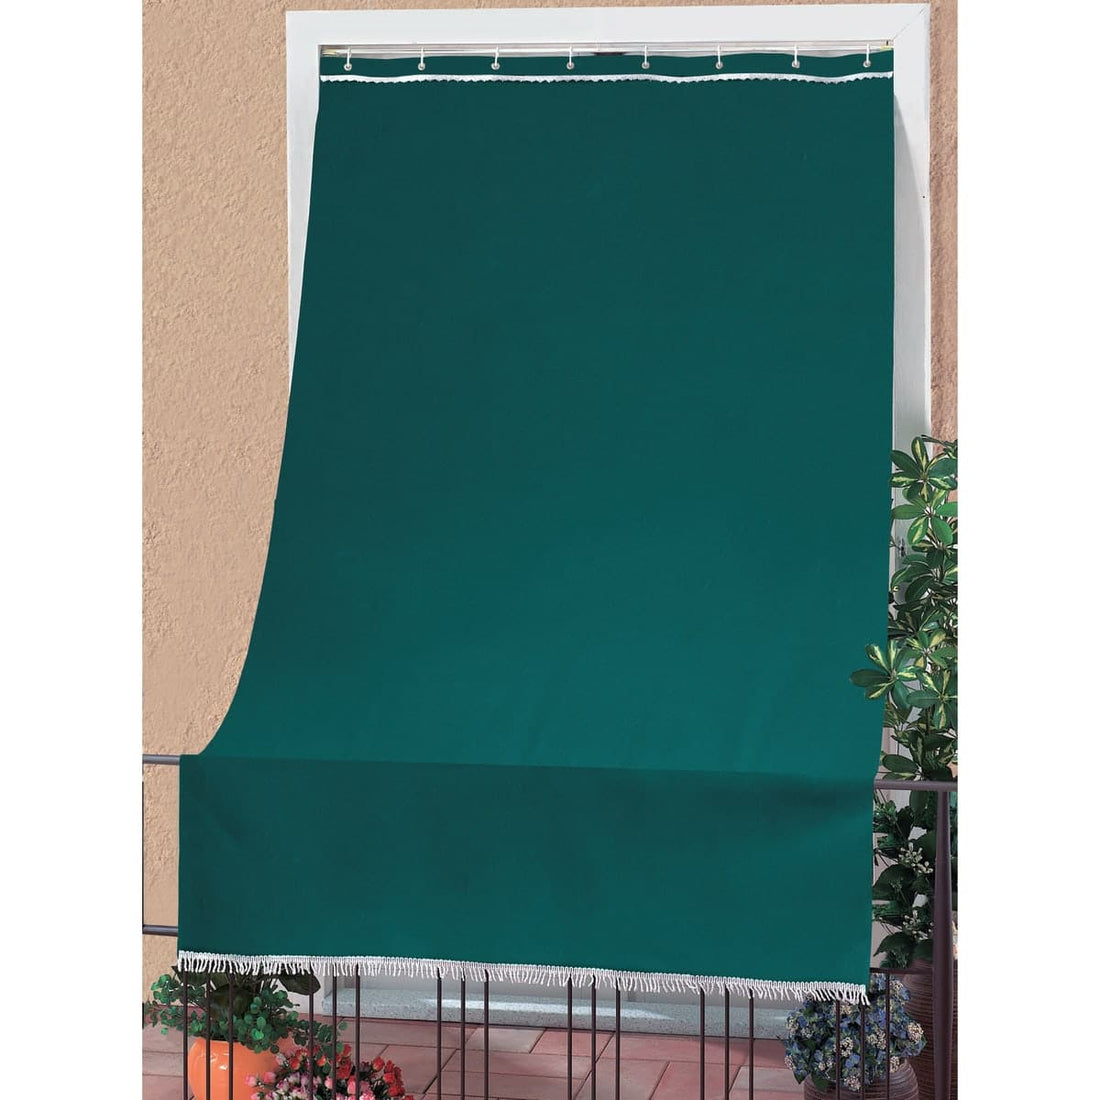 CARIBBEAN BALCONY AWNING 140X300 GREEN W/HANGINGS AND HOOKS